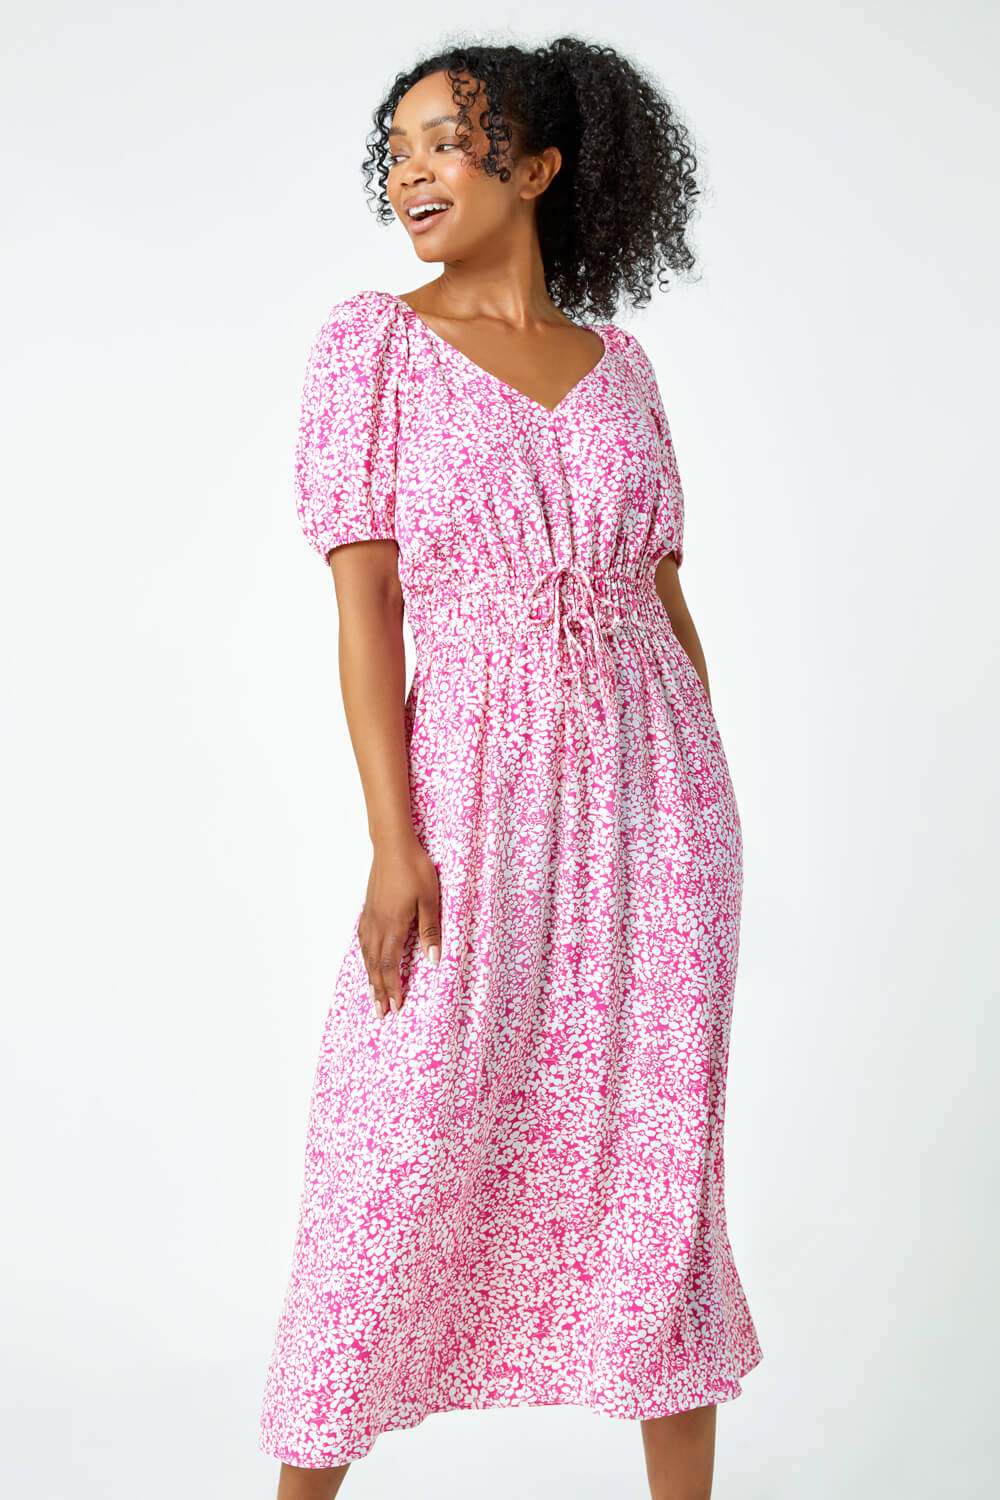 PINK Petite Ditsy Floral Stretch Midi Dress, Image 2 of 6